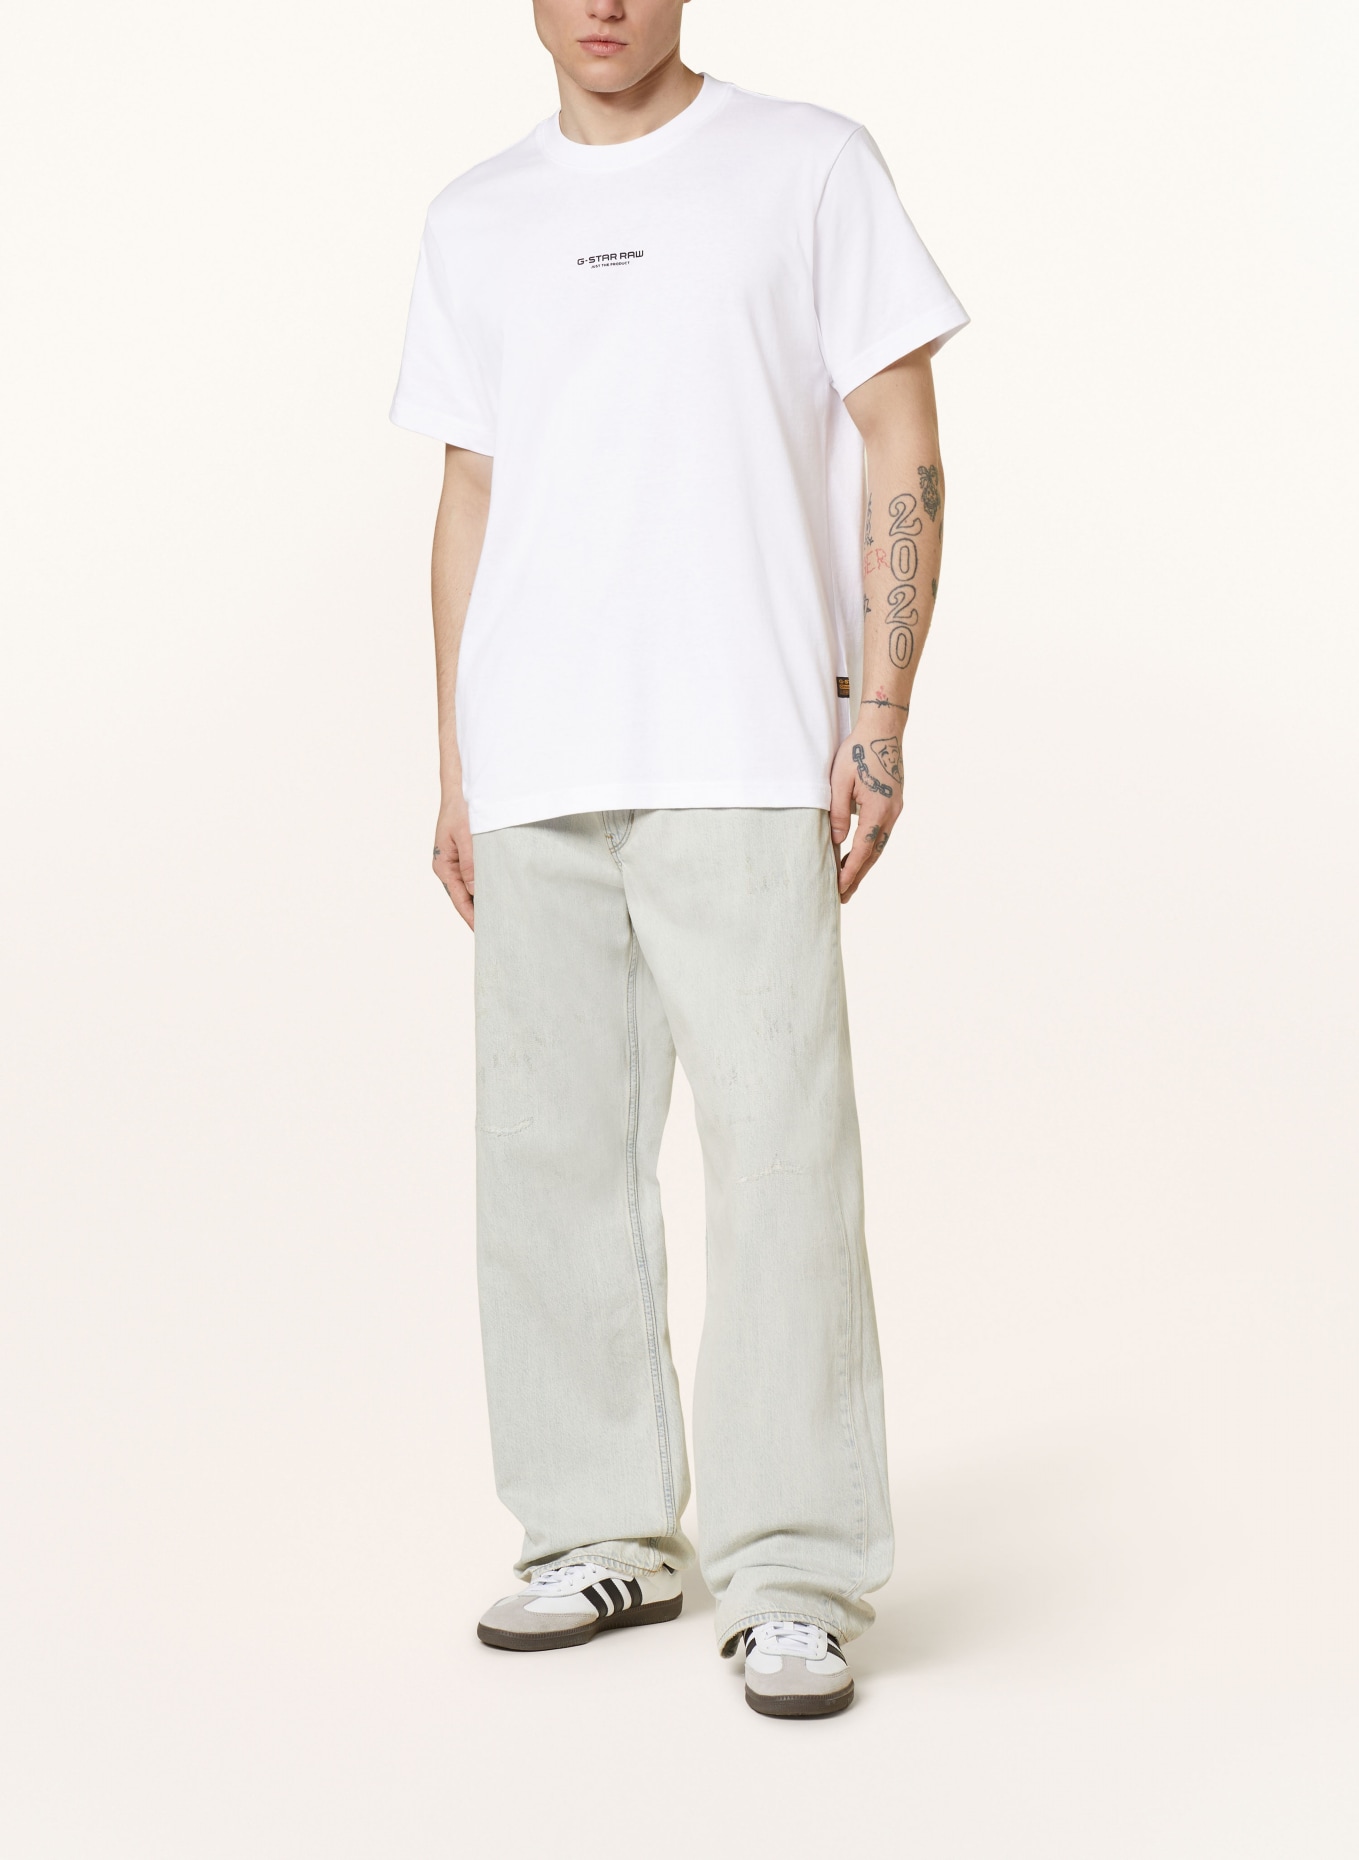 G-Star RAW T-shirt, Color: WHITE (Image 2)